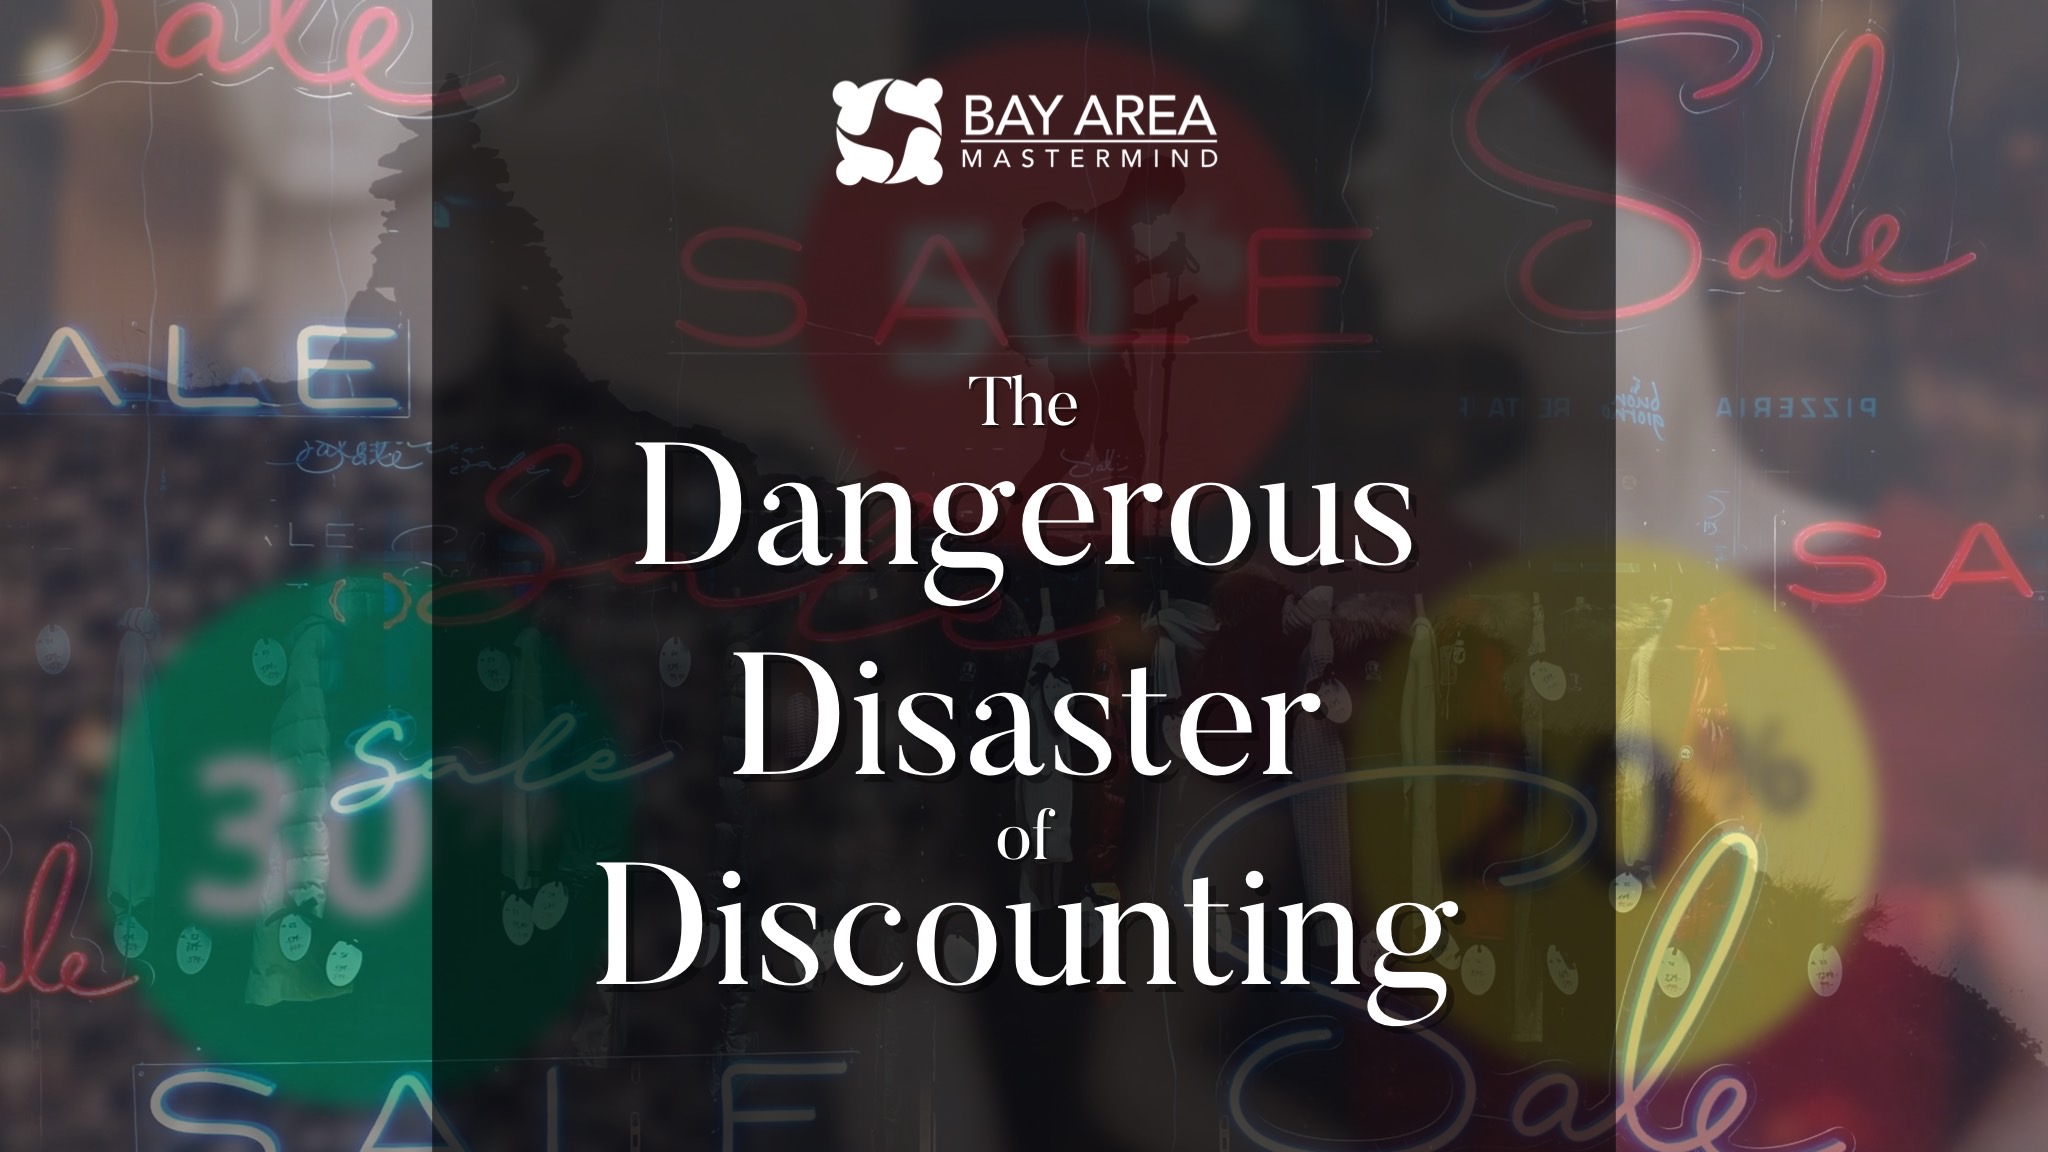 Discounting Dangers